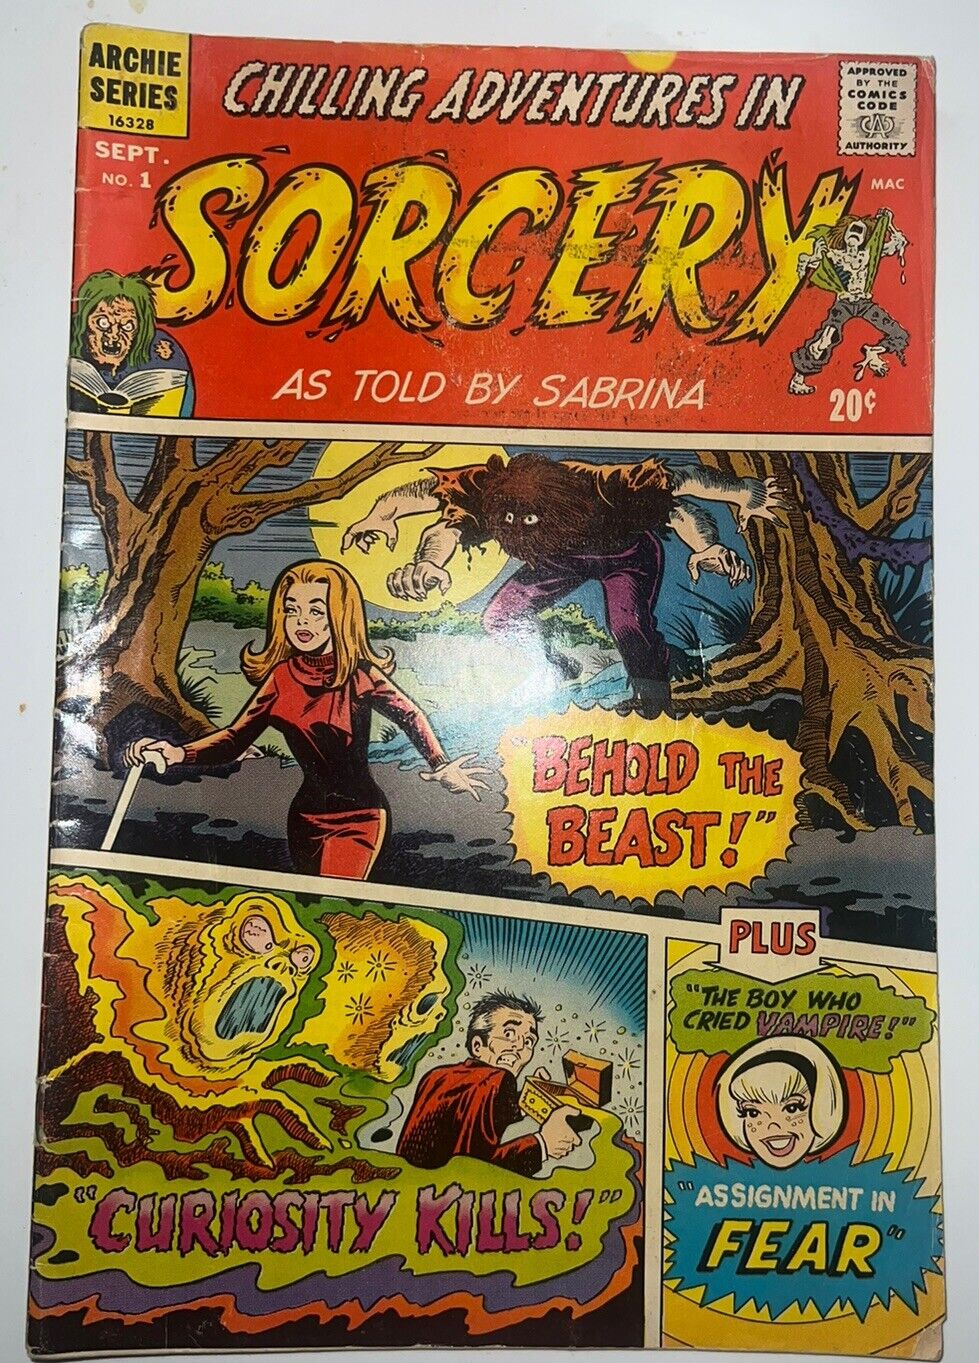 CHILLING ADVENTURES IN SORCERY #1  Archie 1972  Sabrina cover, Behold the Beast